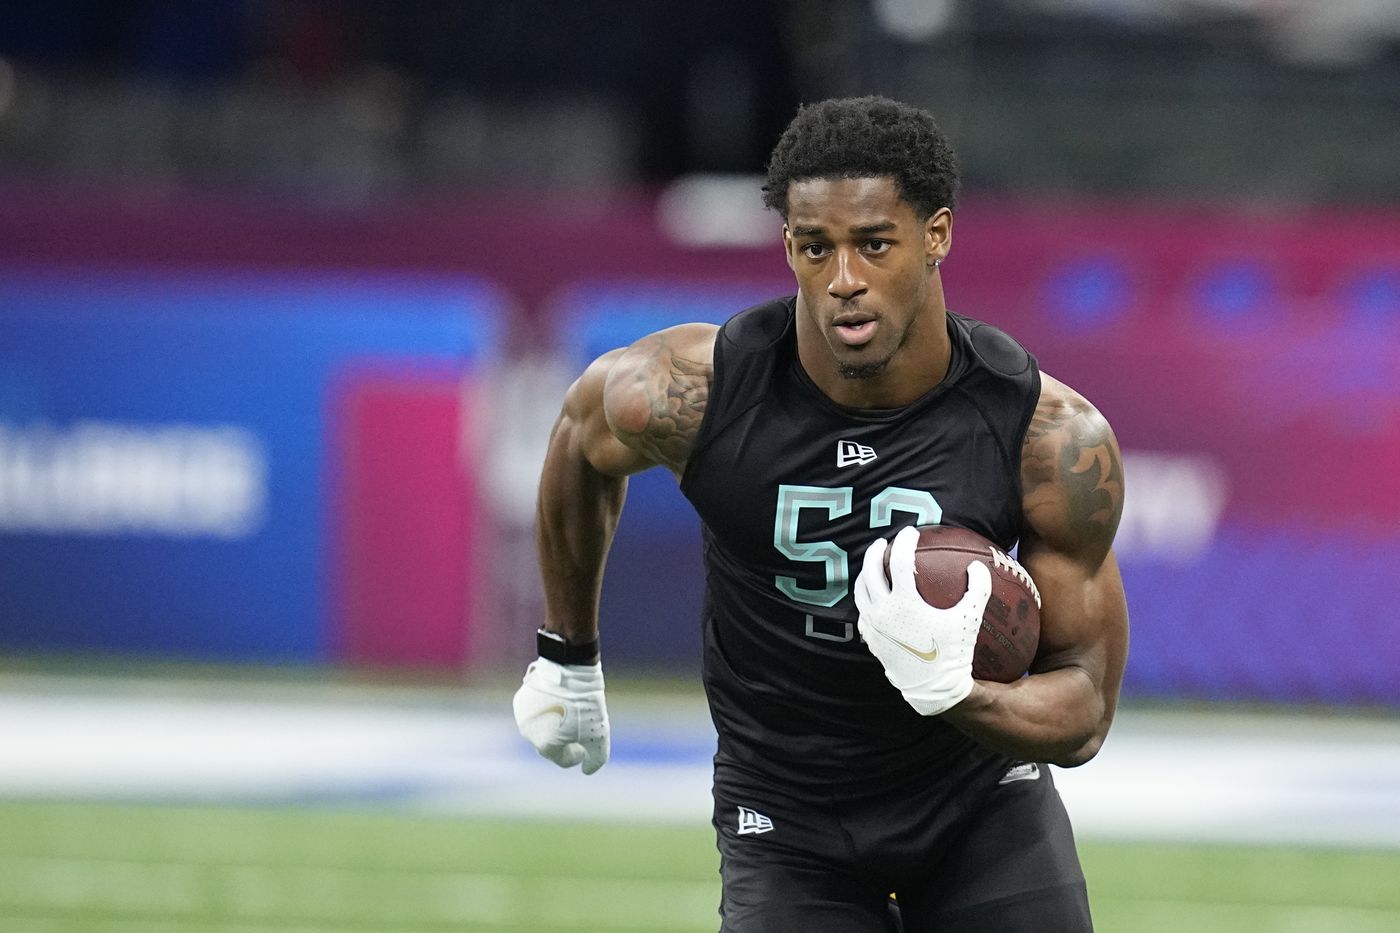 Michigan defensive back Dax Hill runs a drill during the NFL scouting combine on March 6, 2022, in Indianapolis.